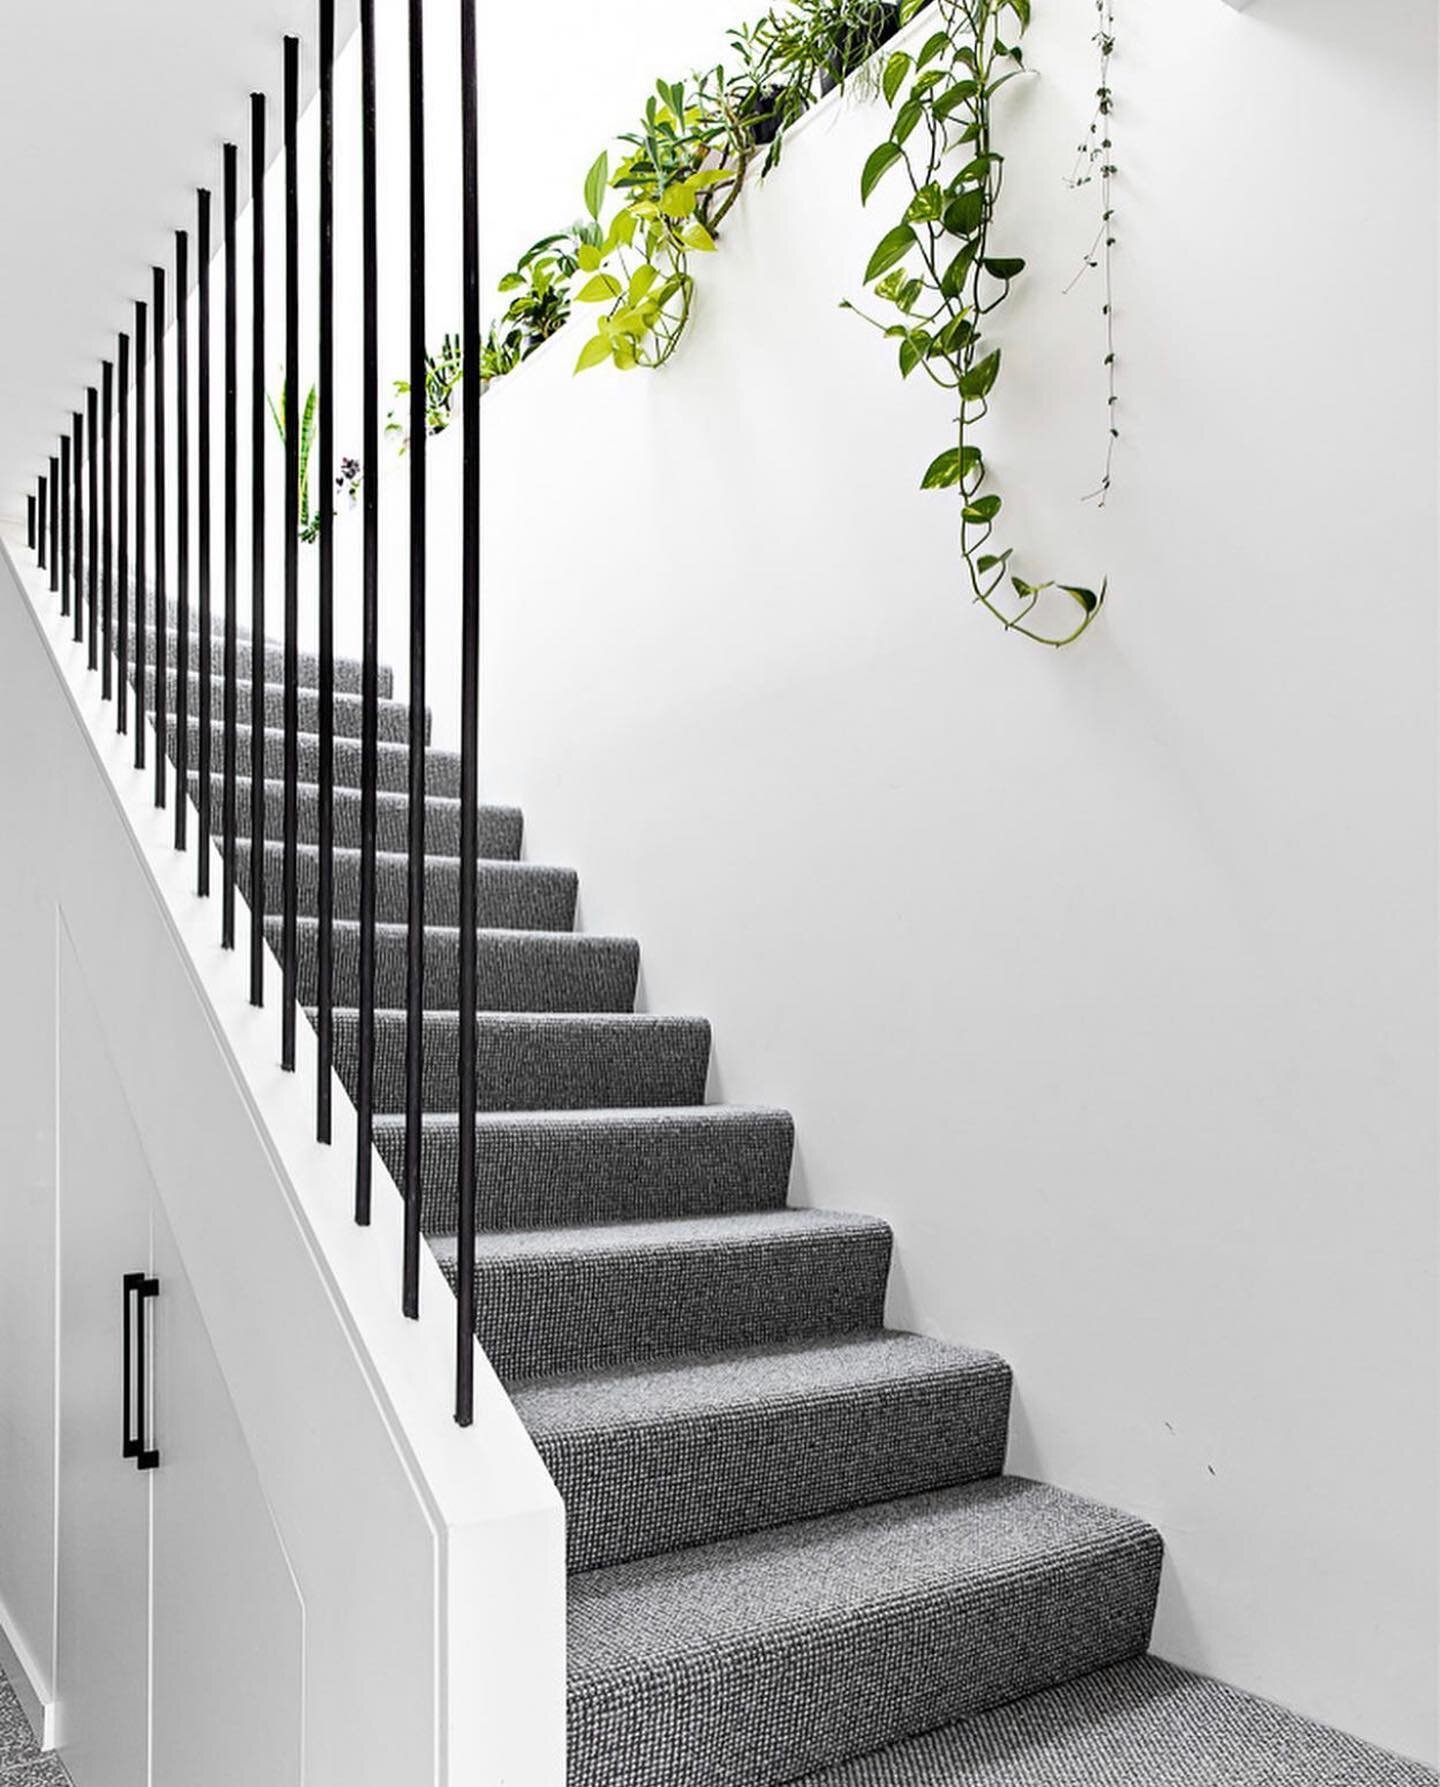 This pretty little staircase was awarded the &lsquo;Best of Houzz Design 2021&rsquo;. 🛠🏡

Designed by architect @kittyleearchitecture and built by us! 🛠

Thank you to the @houzzau community. What a treat! 🙏

Photography by @the.palm.co